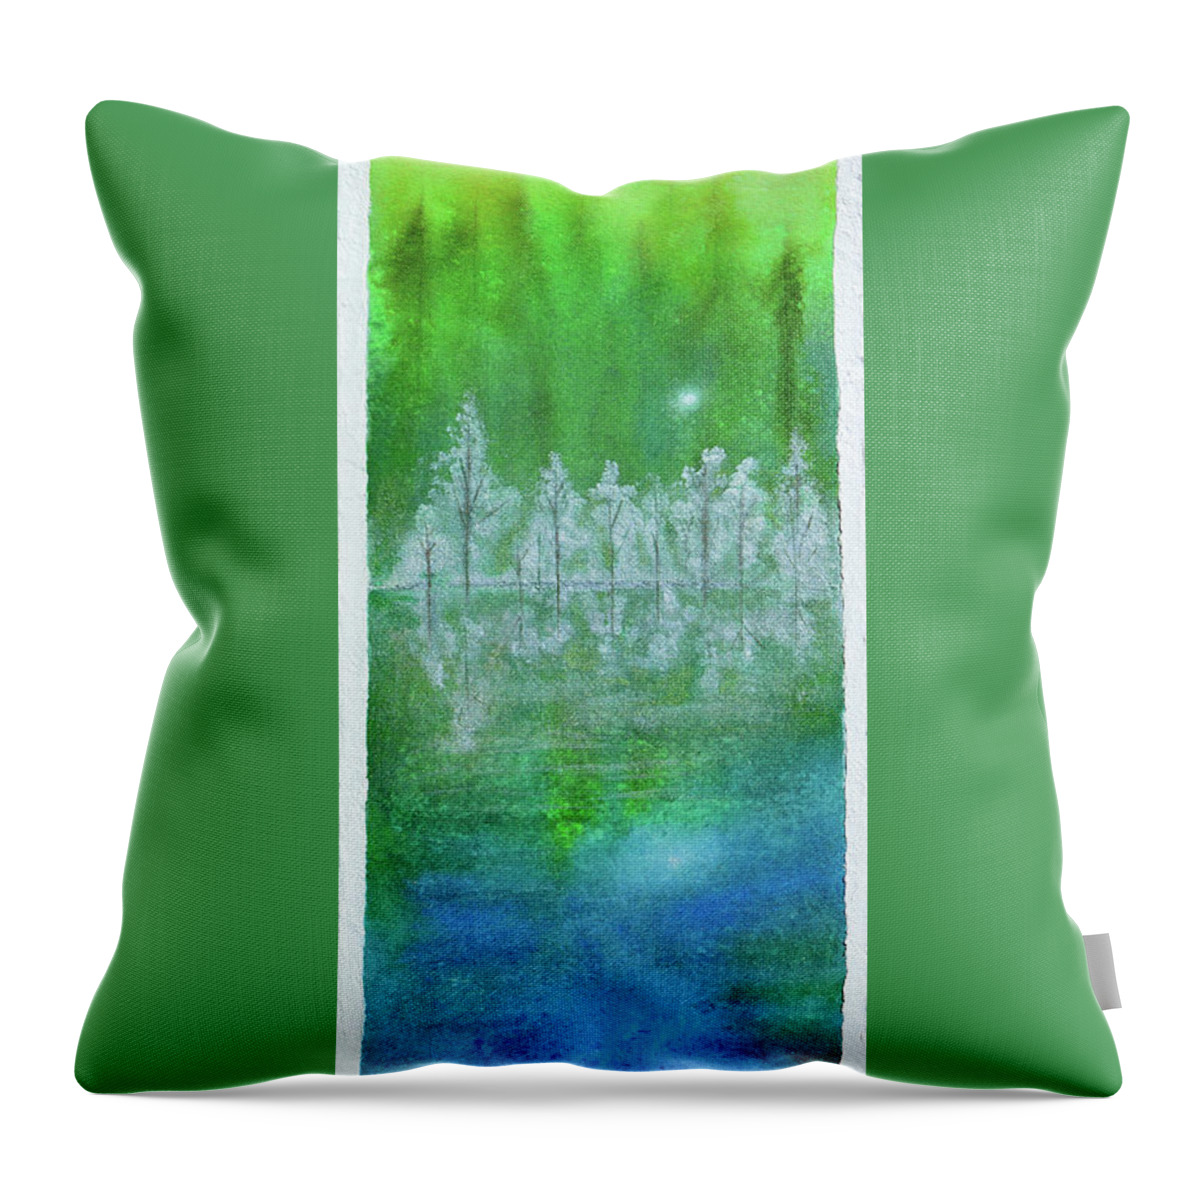 Abstract Landscape Throw Pillow featuring the painting Rising Mist by Donna Blackhall